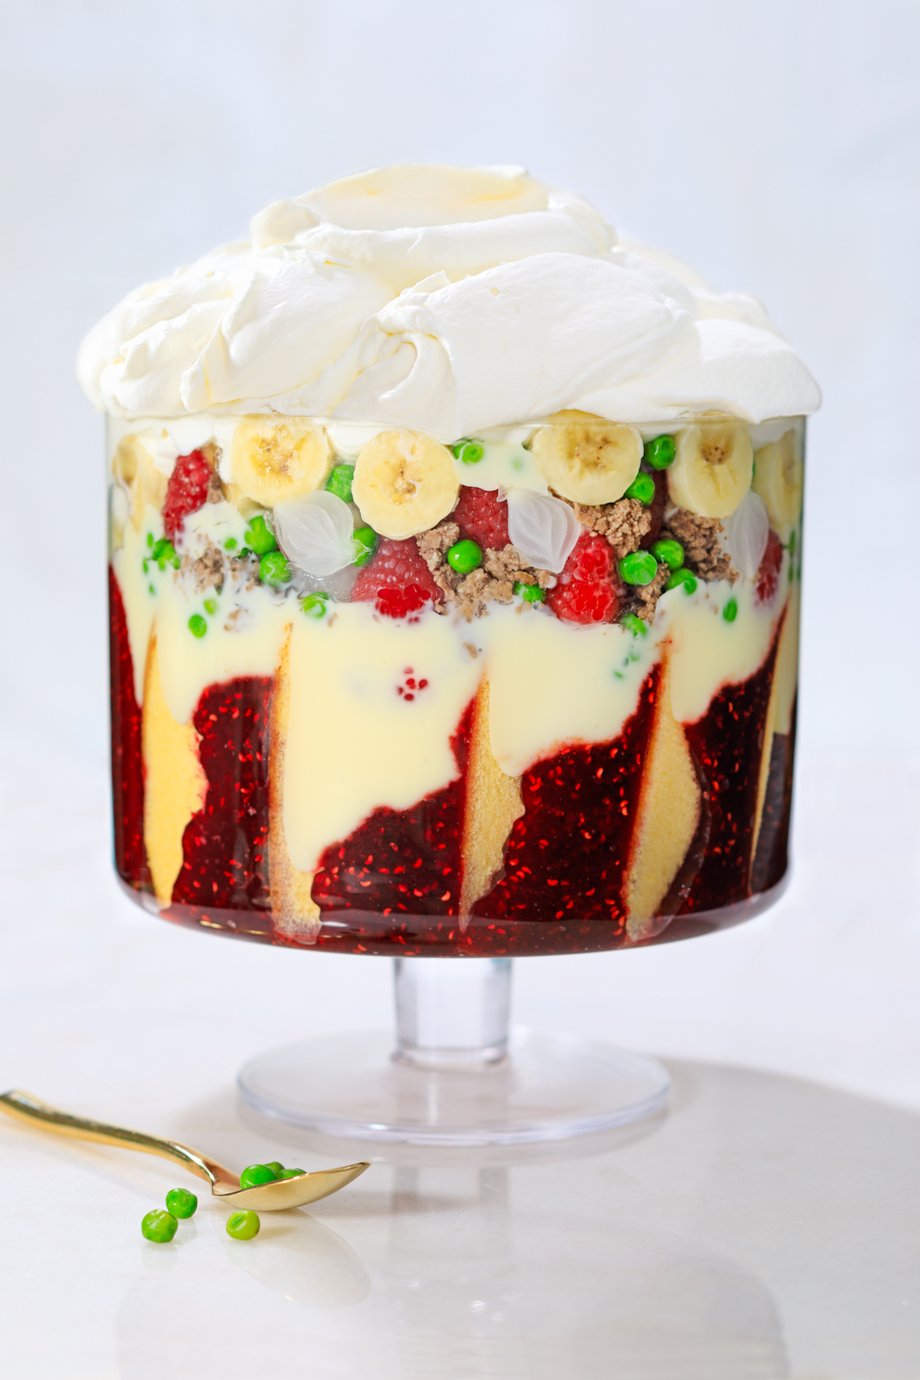 Trifle instead of truffle how funny